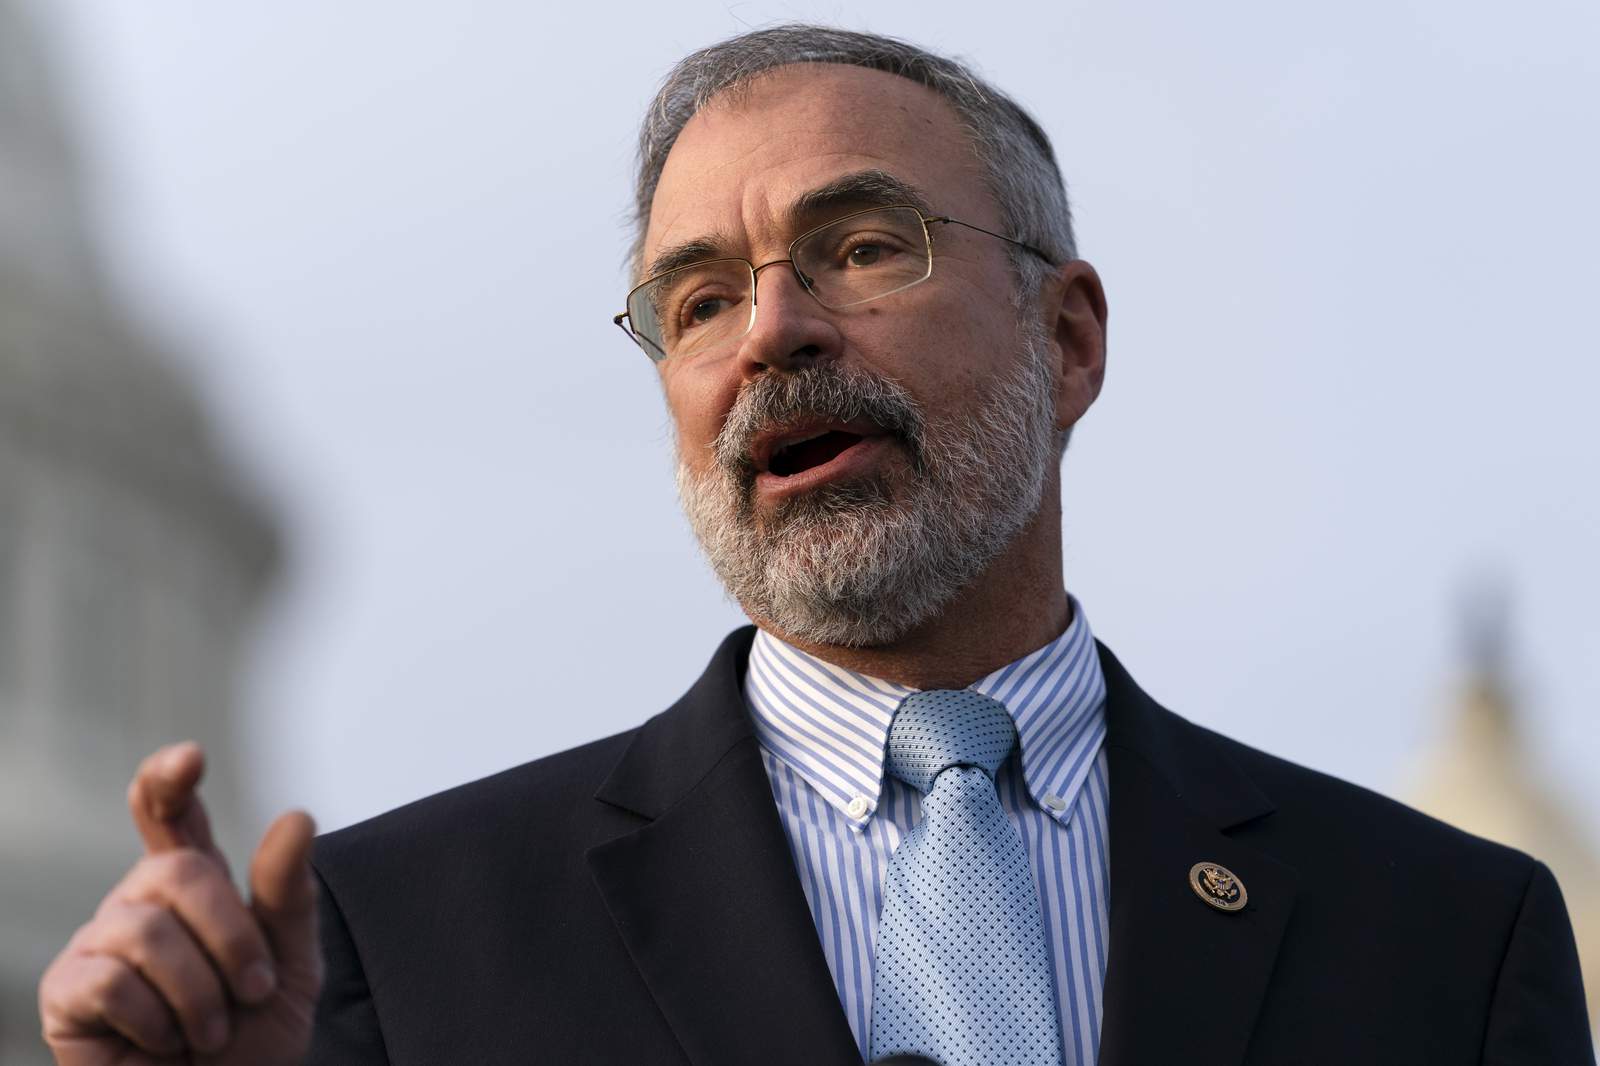 GOP lawmaker with gun sets off House chamber metal detector